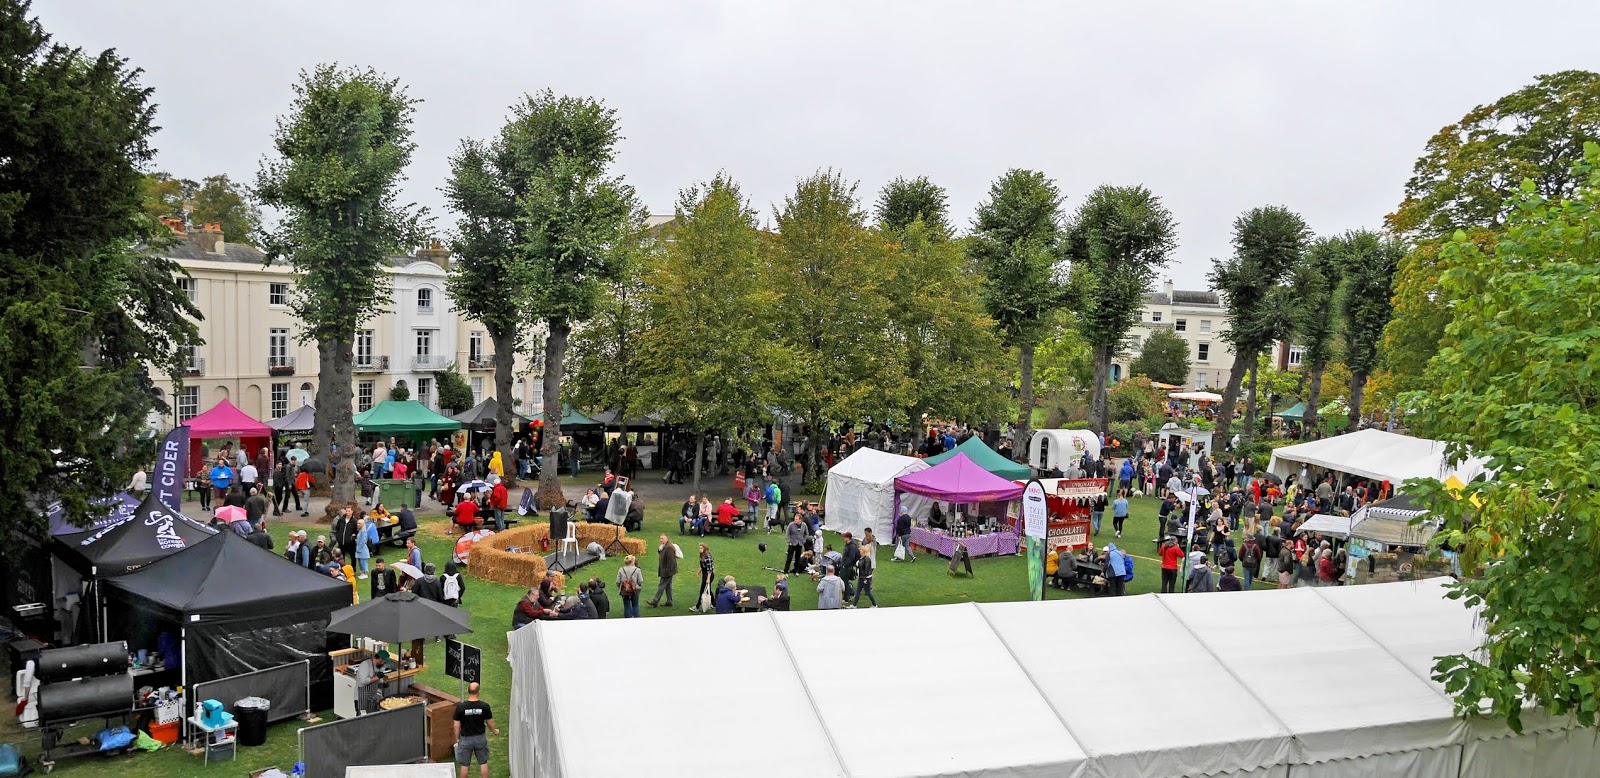 Looking down on the Canterbury Food Festival from the Mound in Dane John Gardens, Canterbury